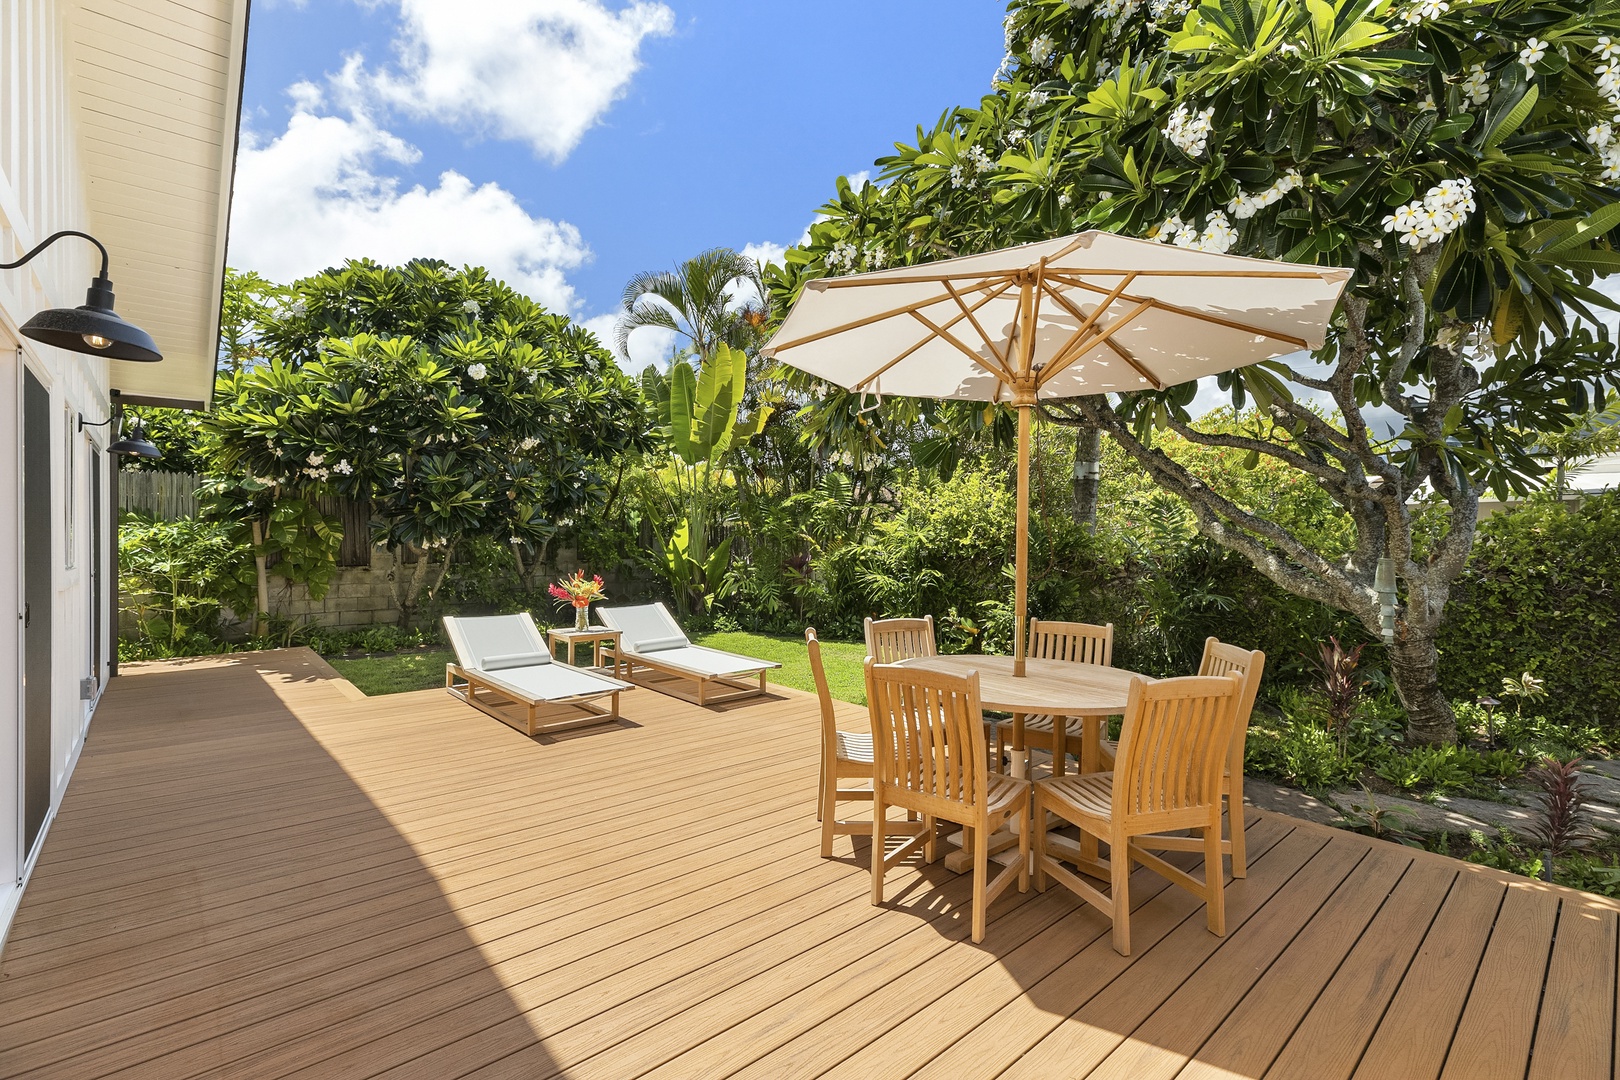 Kailua Vacation Rentals, Ranch Beach House - Private, Calm, and peaceful main lanai and garden area. Large deck with Chaise loungers for soaking up the sun and outdoor seating area.